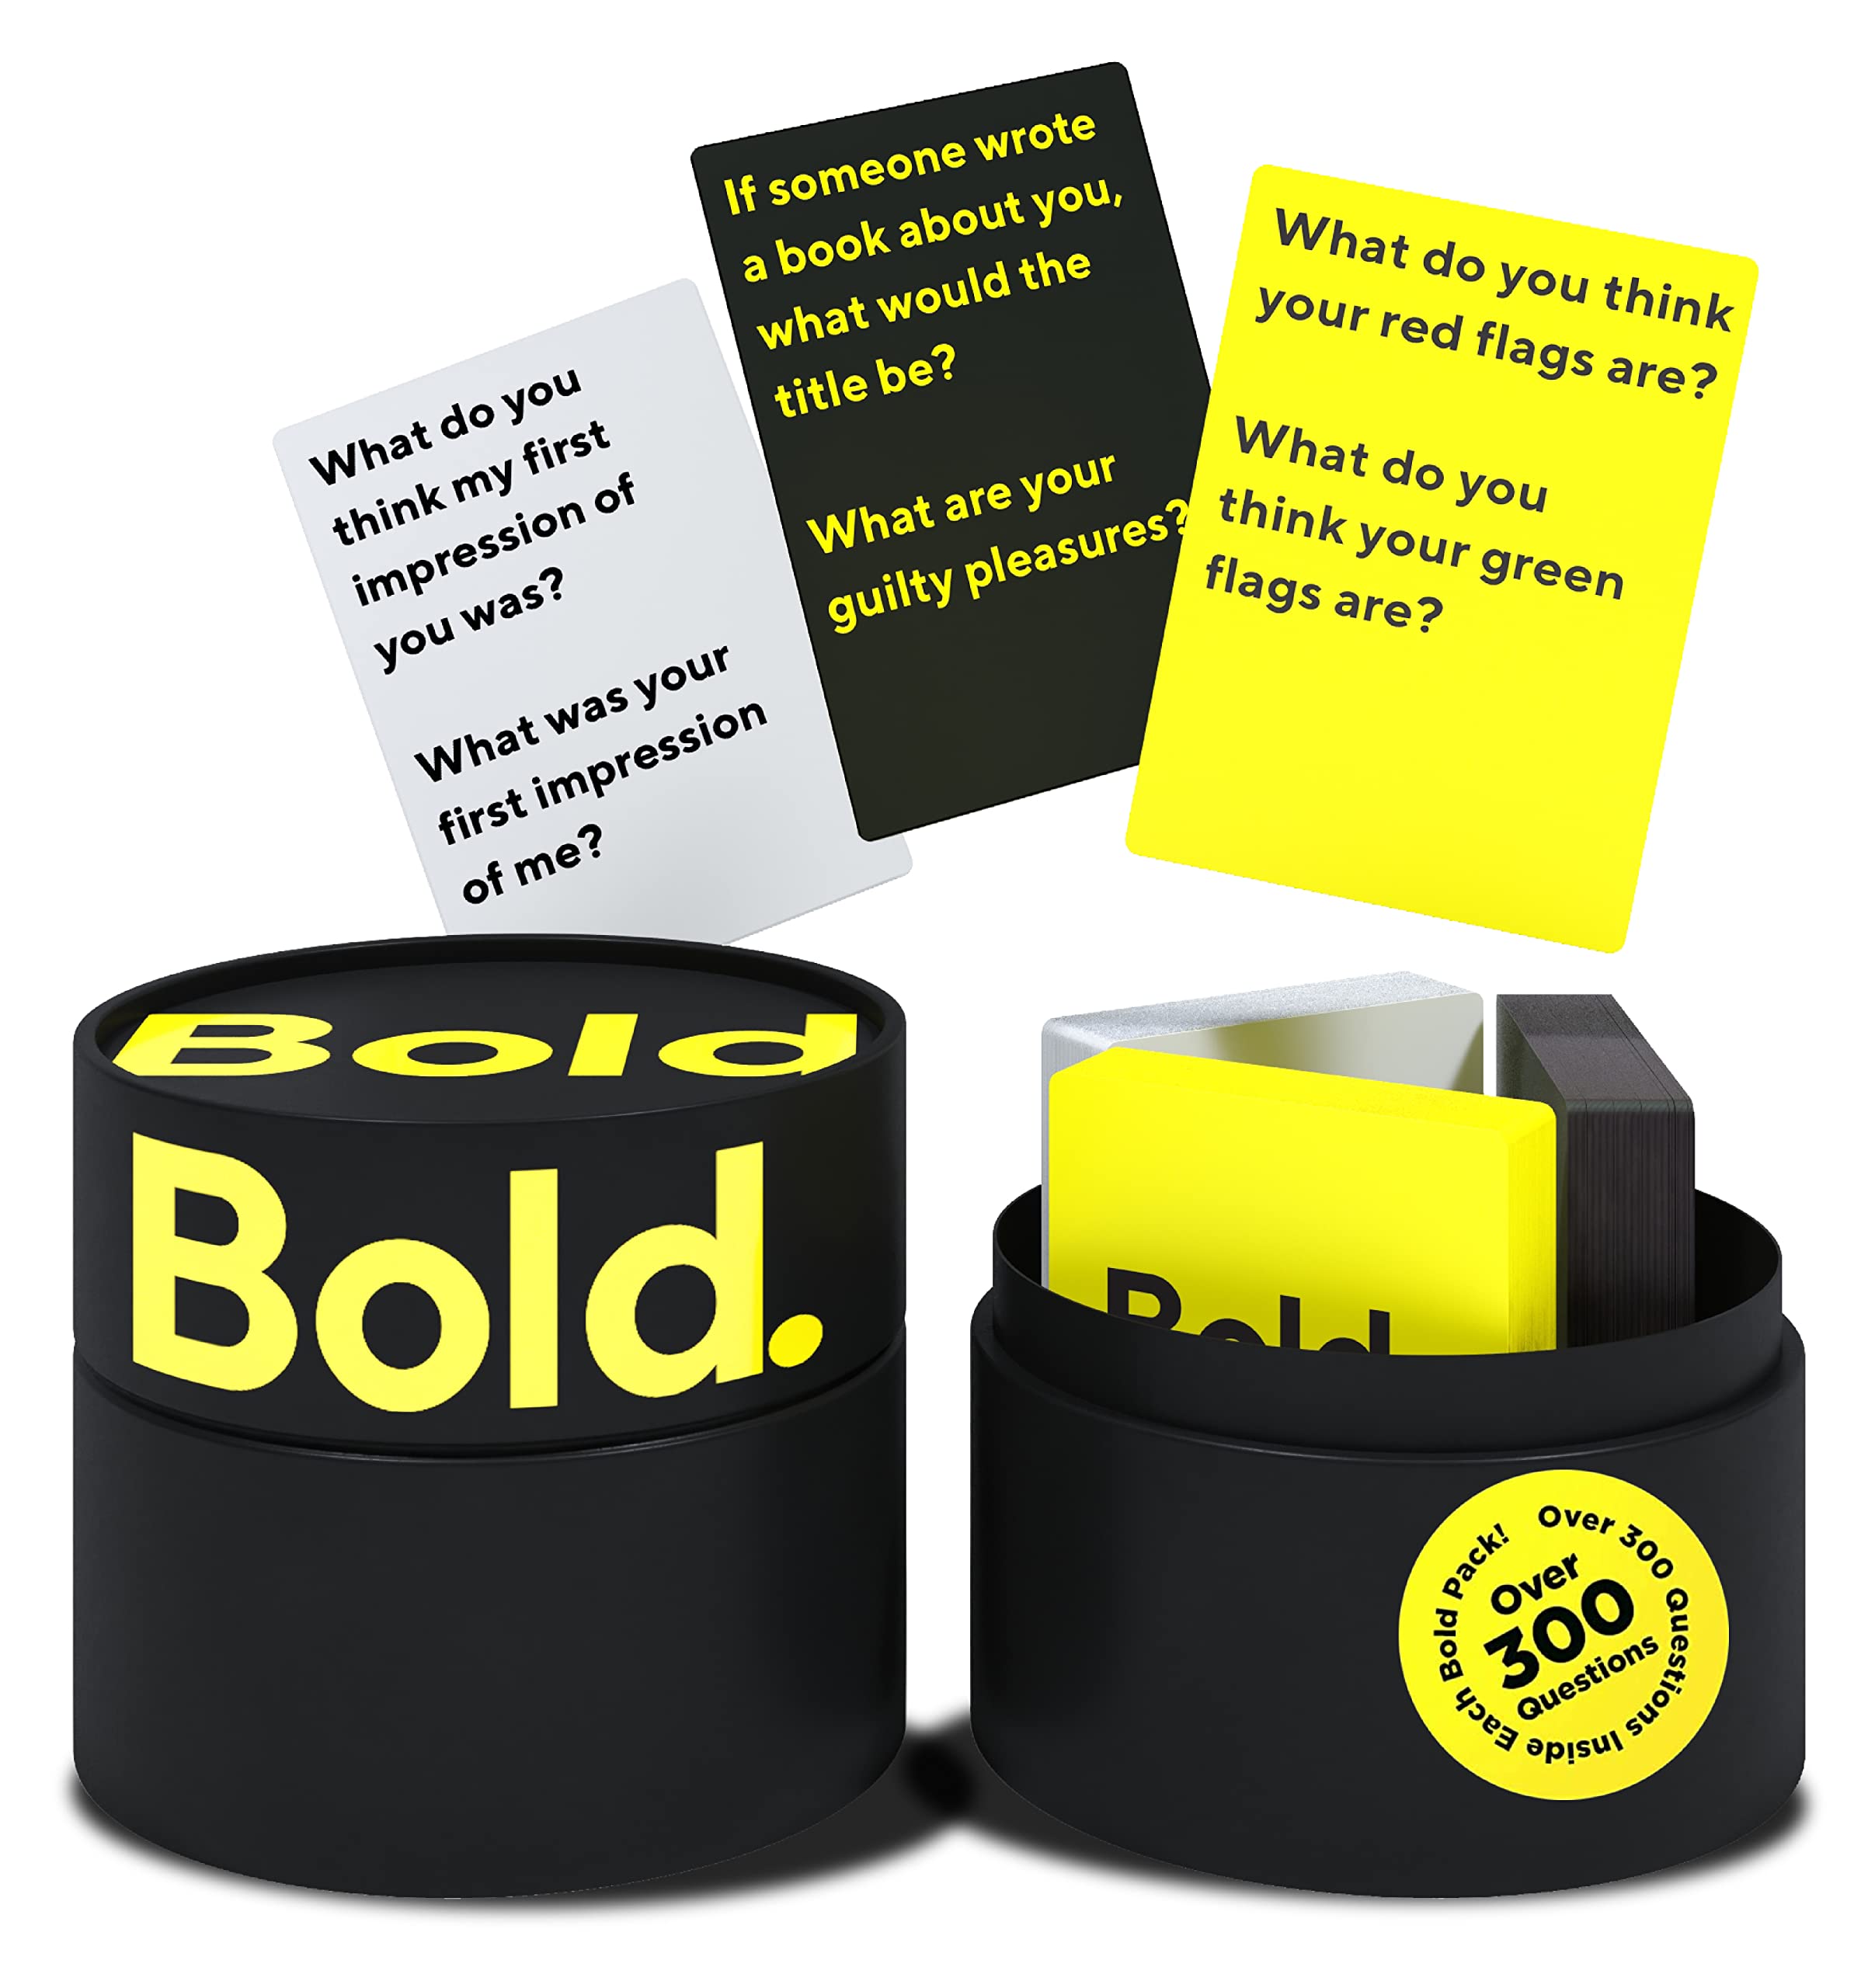 Bold Couples Card Game